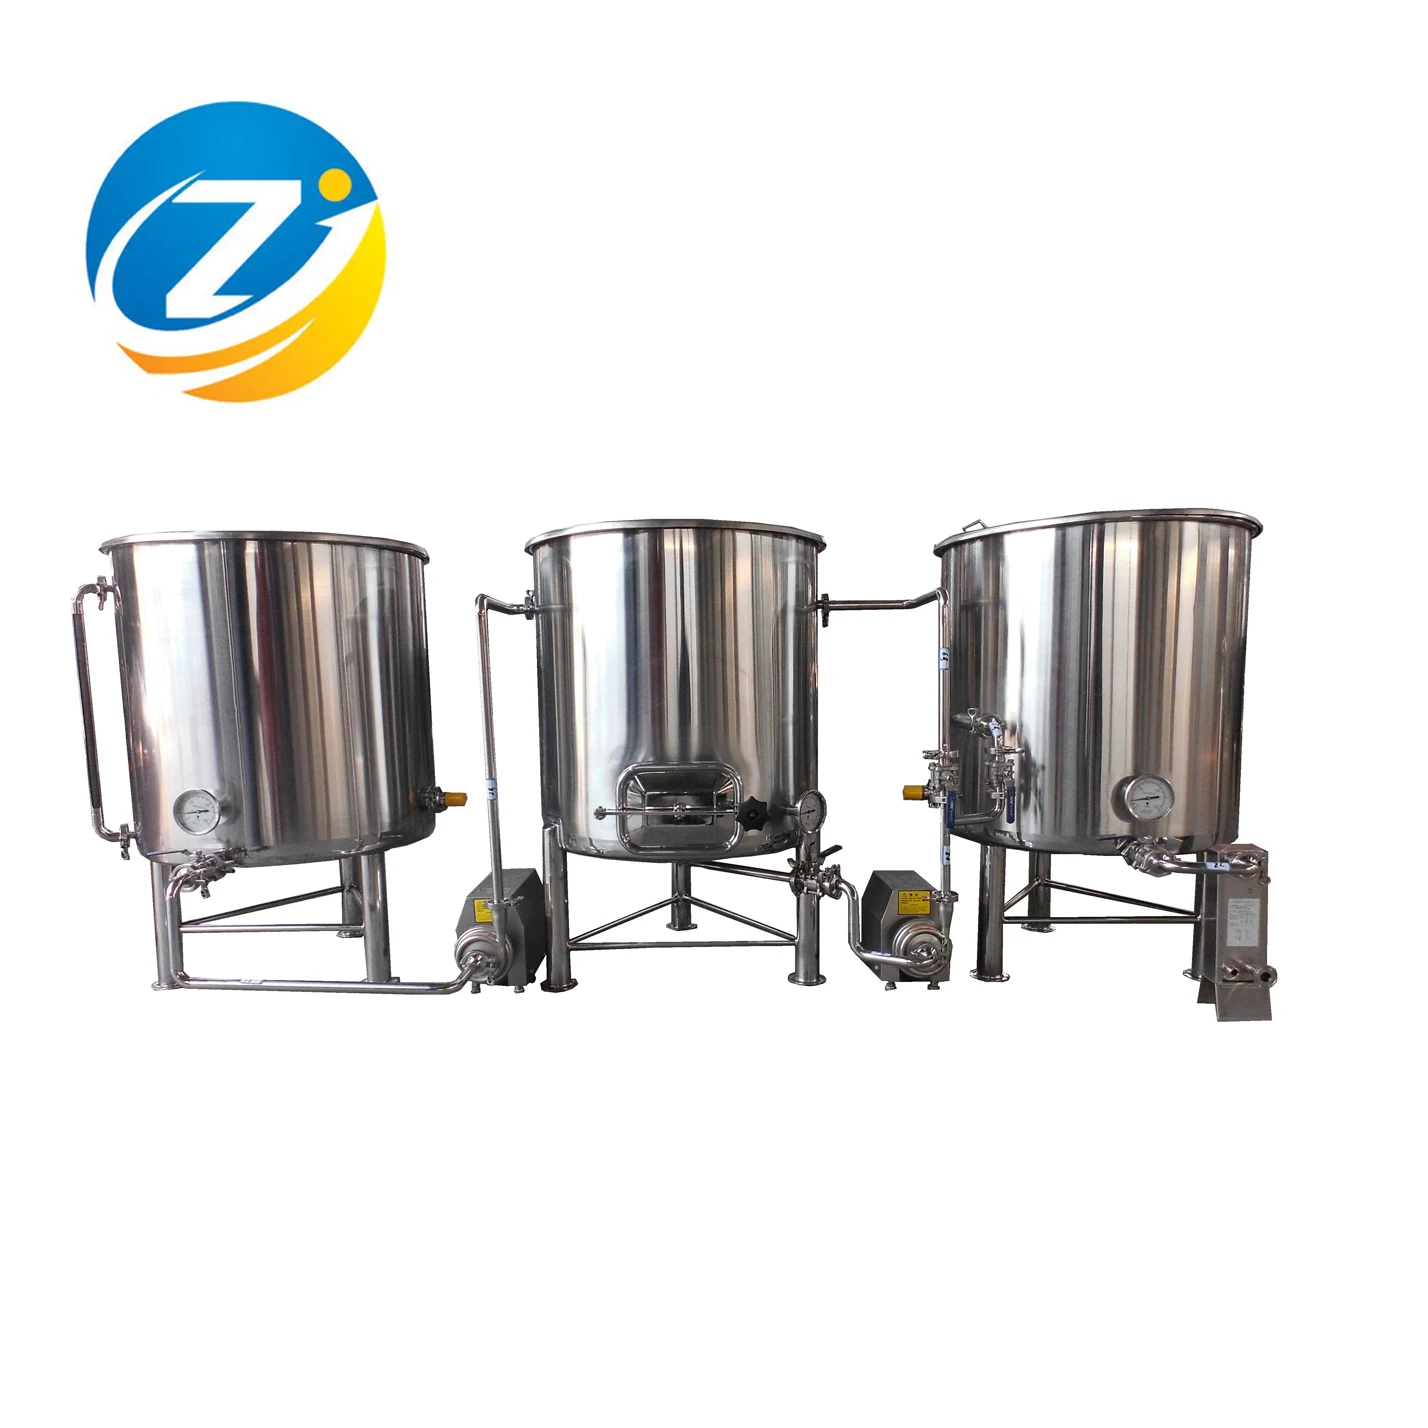 
100L beer brewing system mash lauter tun with agitator steel 304 100% 